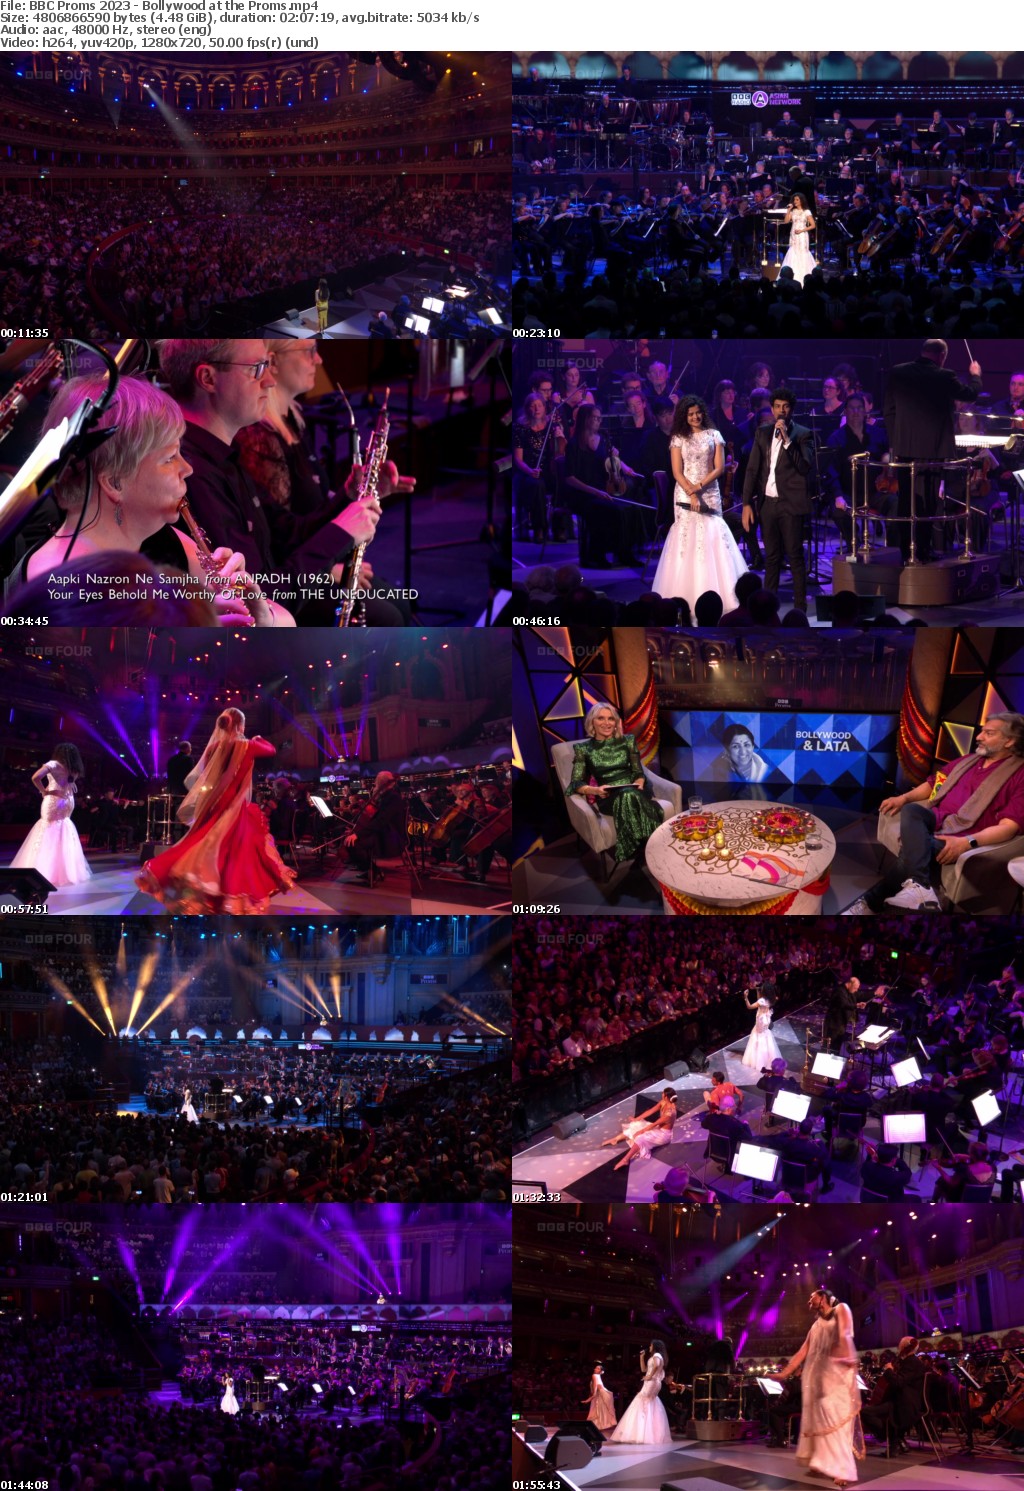 BBC Proms 2023 - Bollywood at the Proms (1280x720p HD, 50fps, soft Eng subs)